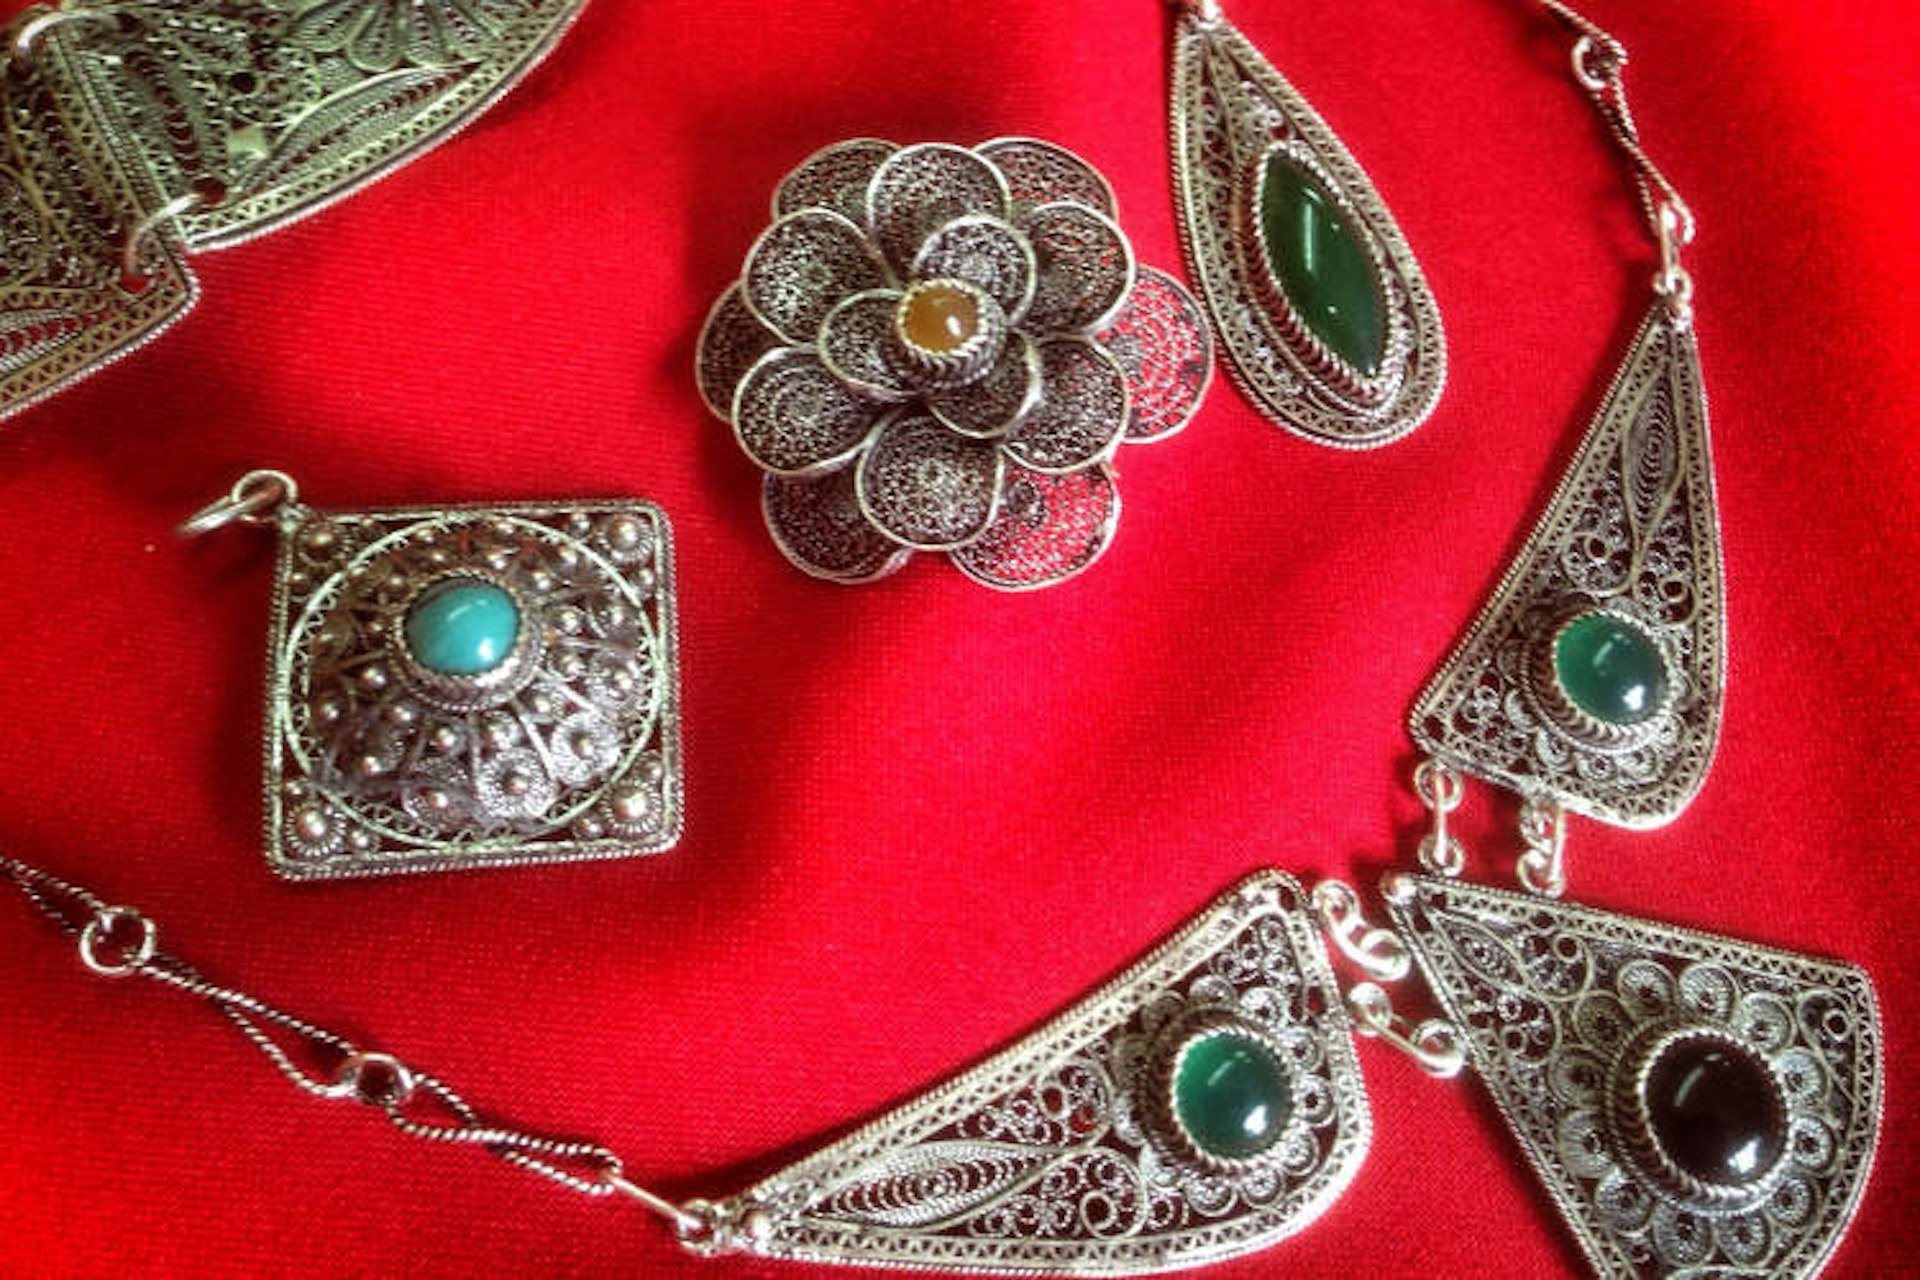 Traditional filigree jewellery at Filigrani collective in Prizren. Image by Larissa Olenicoff / Lonely Planet